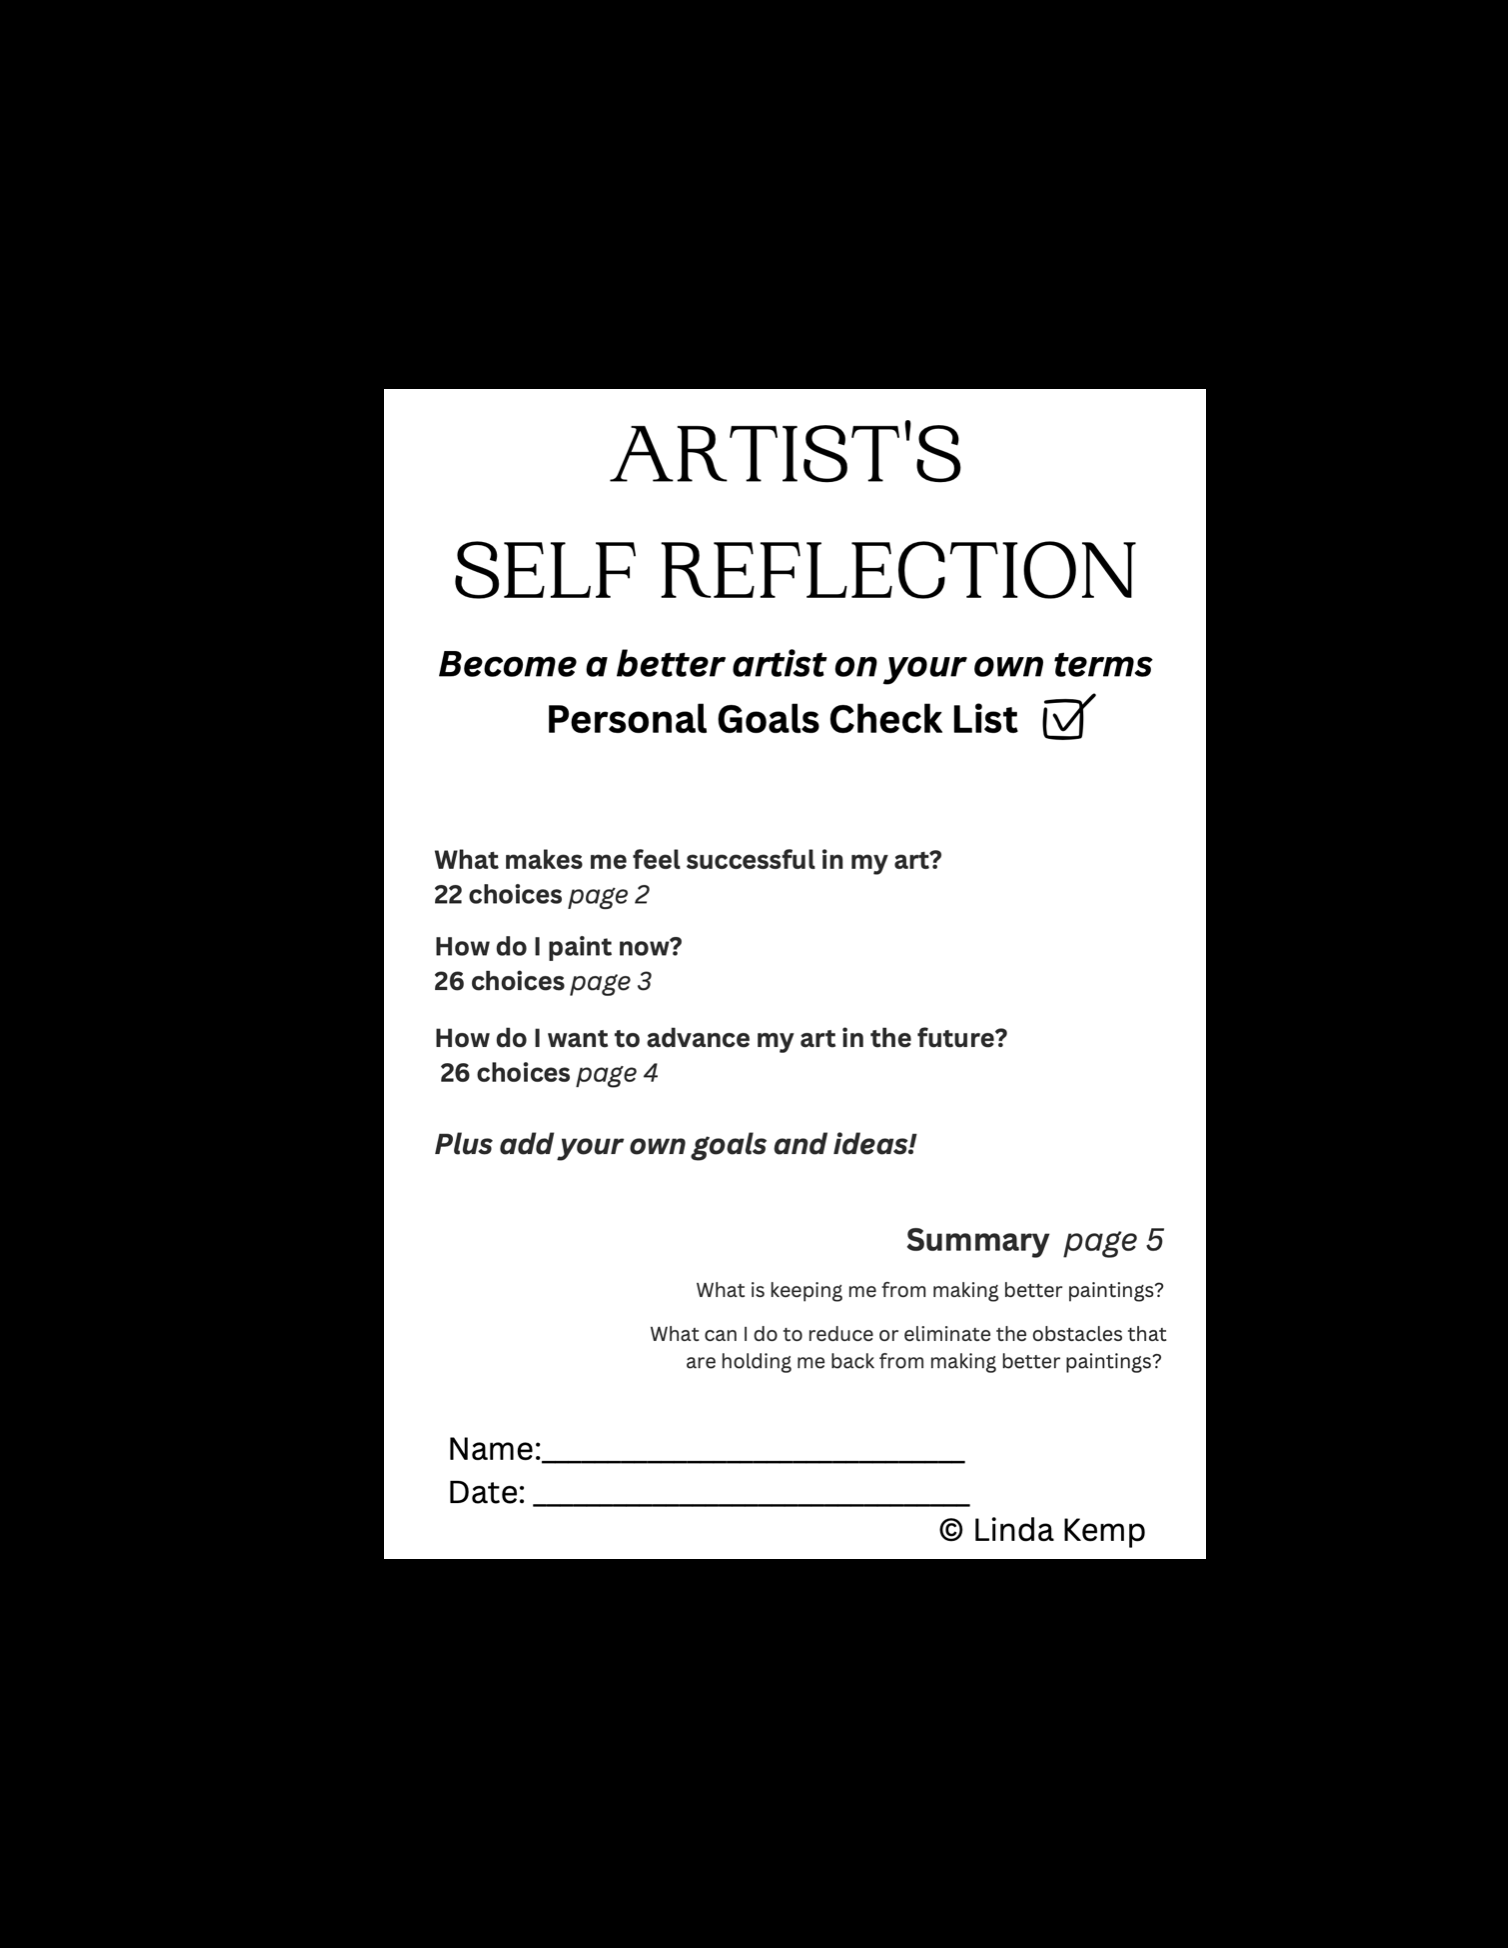 Artist's Self Reflection - Free Checklists - For Printing